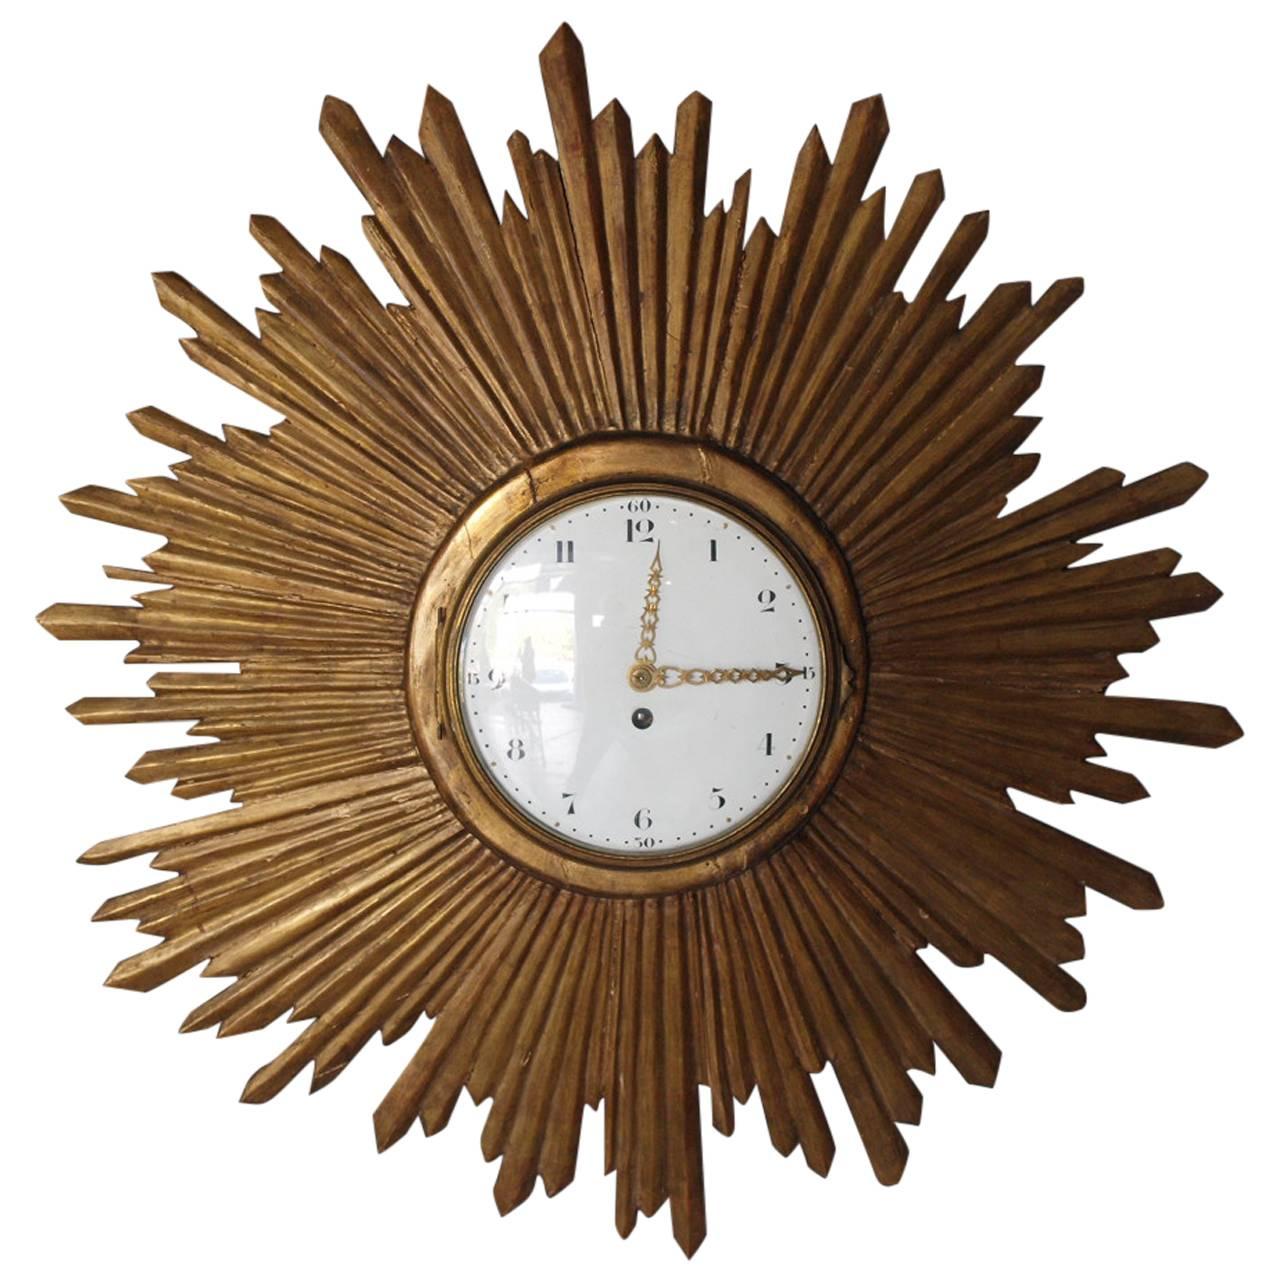 Exceptional and Rare Early 19th Century French Sunburst Clock